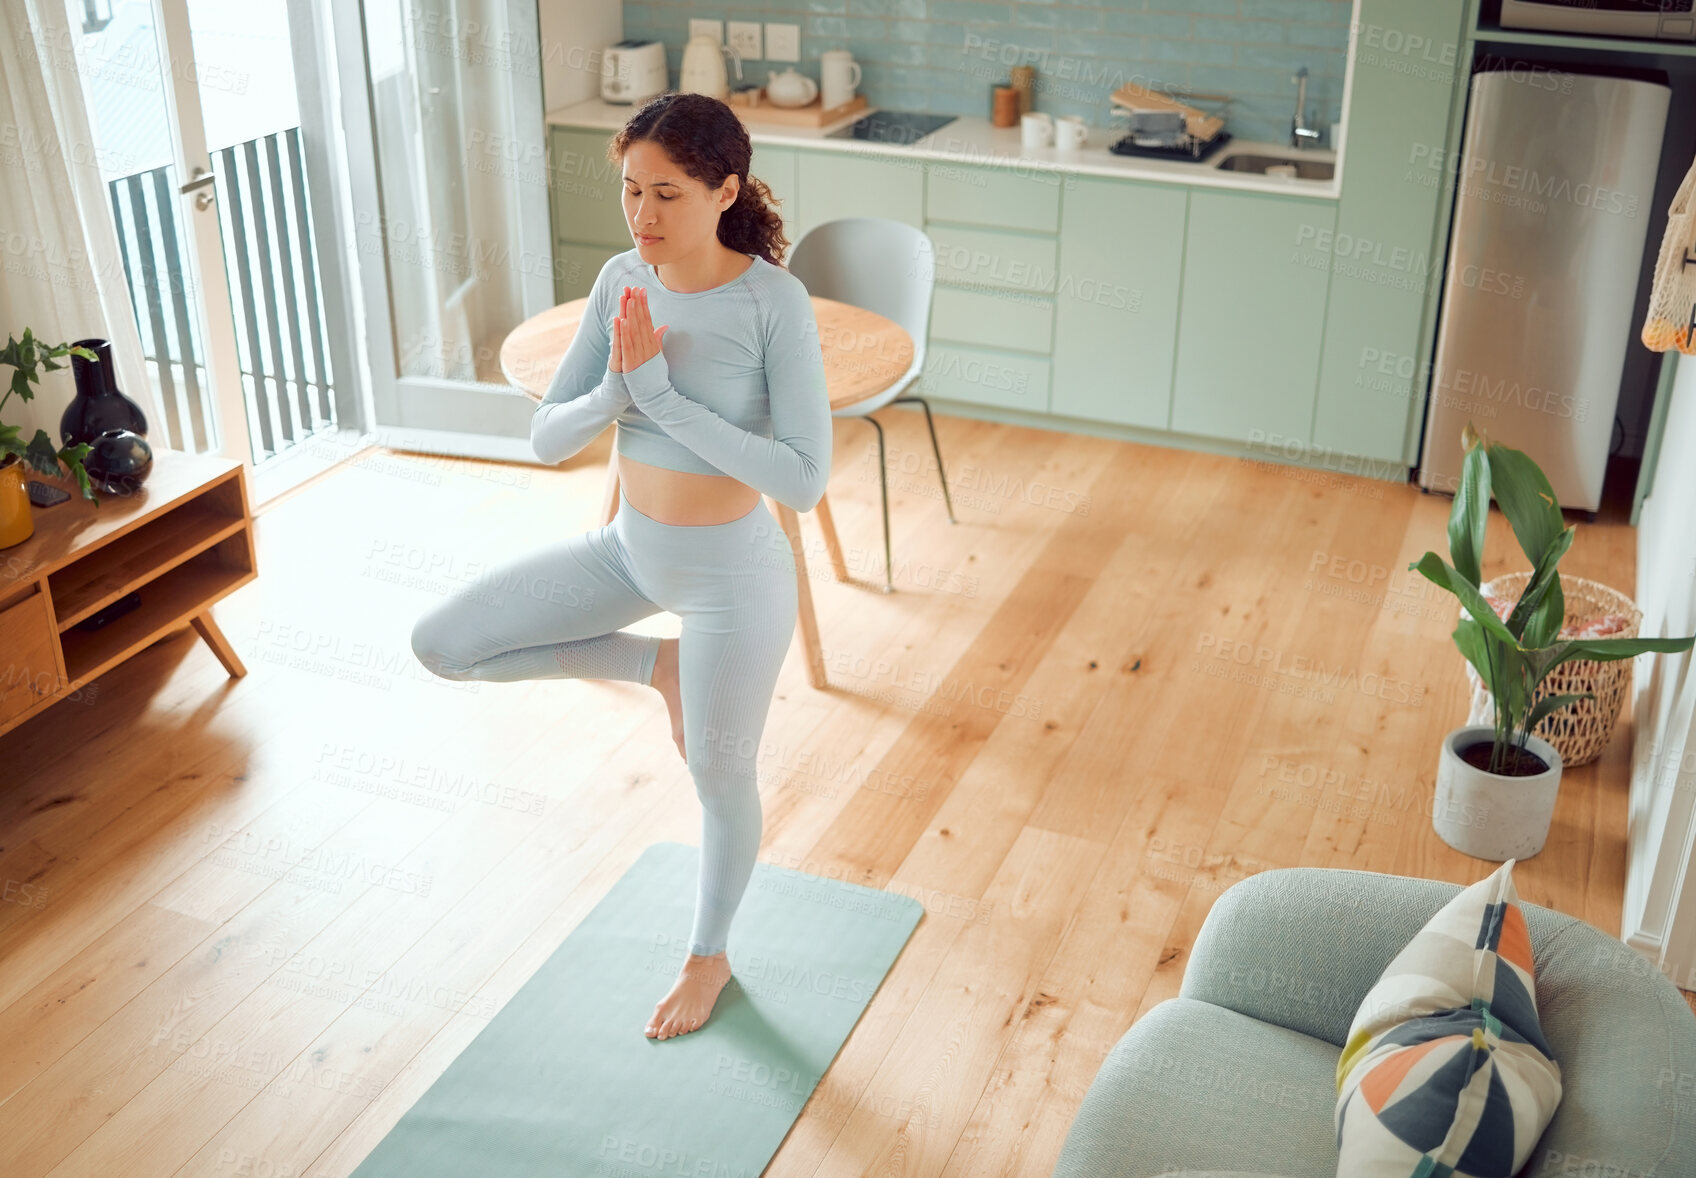 Buy stock photo Beautiful young mixed race woman meditating while standing in an upright position while practicing yoga at home. Hispanic female exercising her body and mind, finding inner peace, balance and clarity